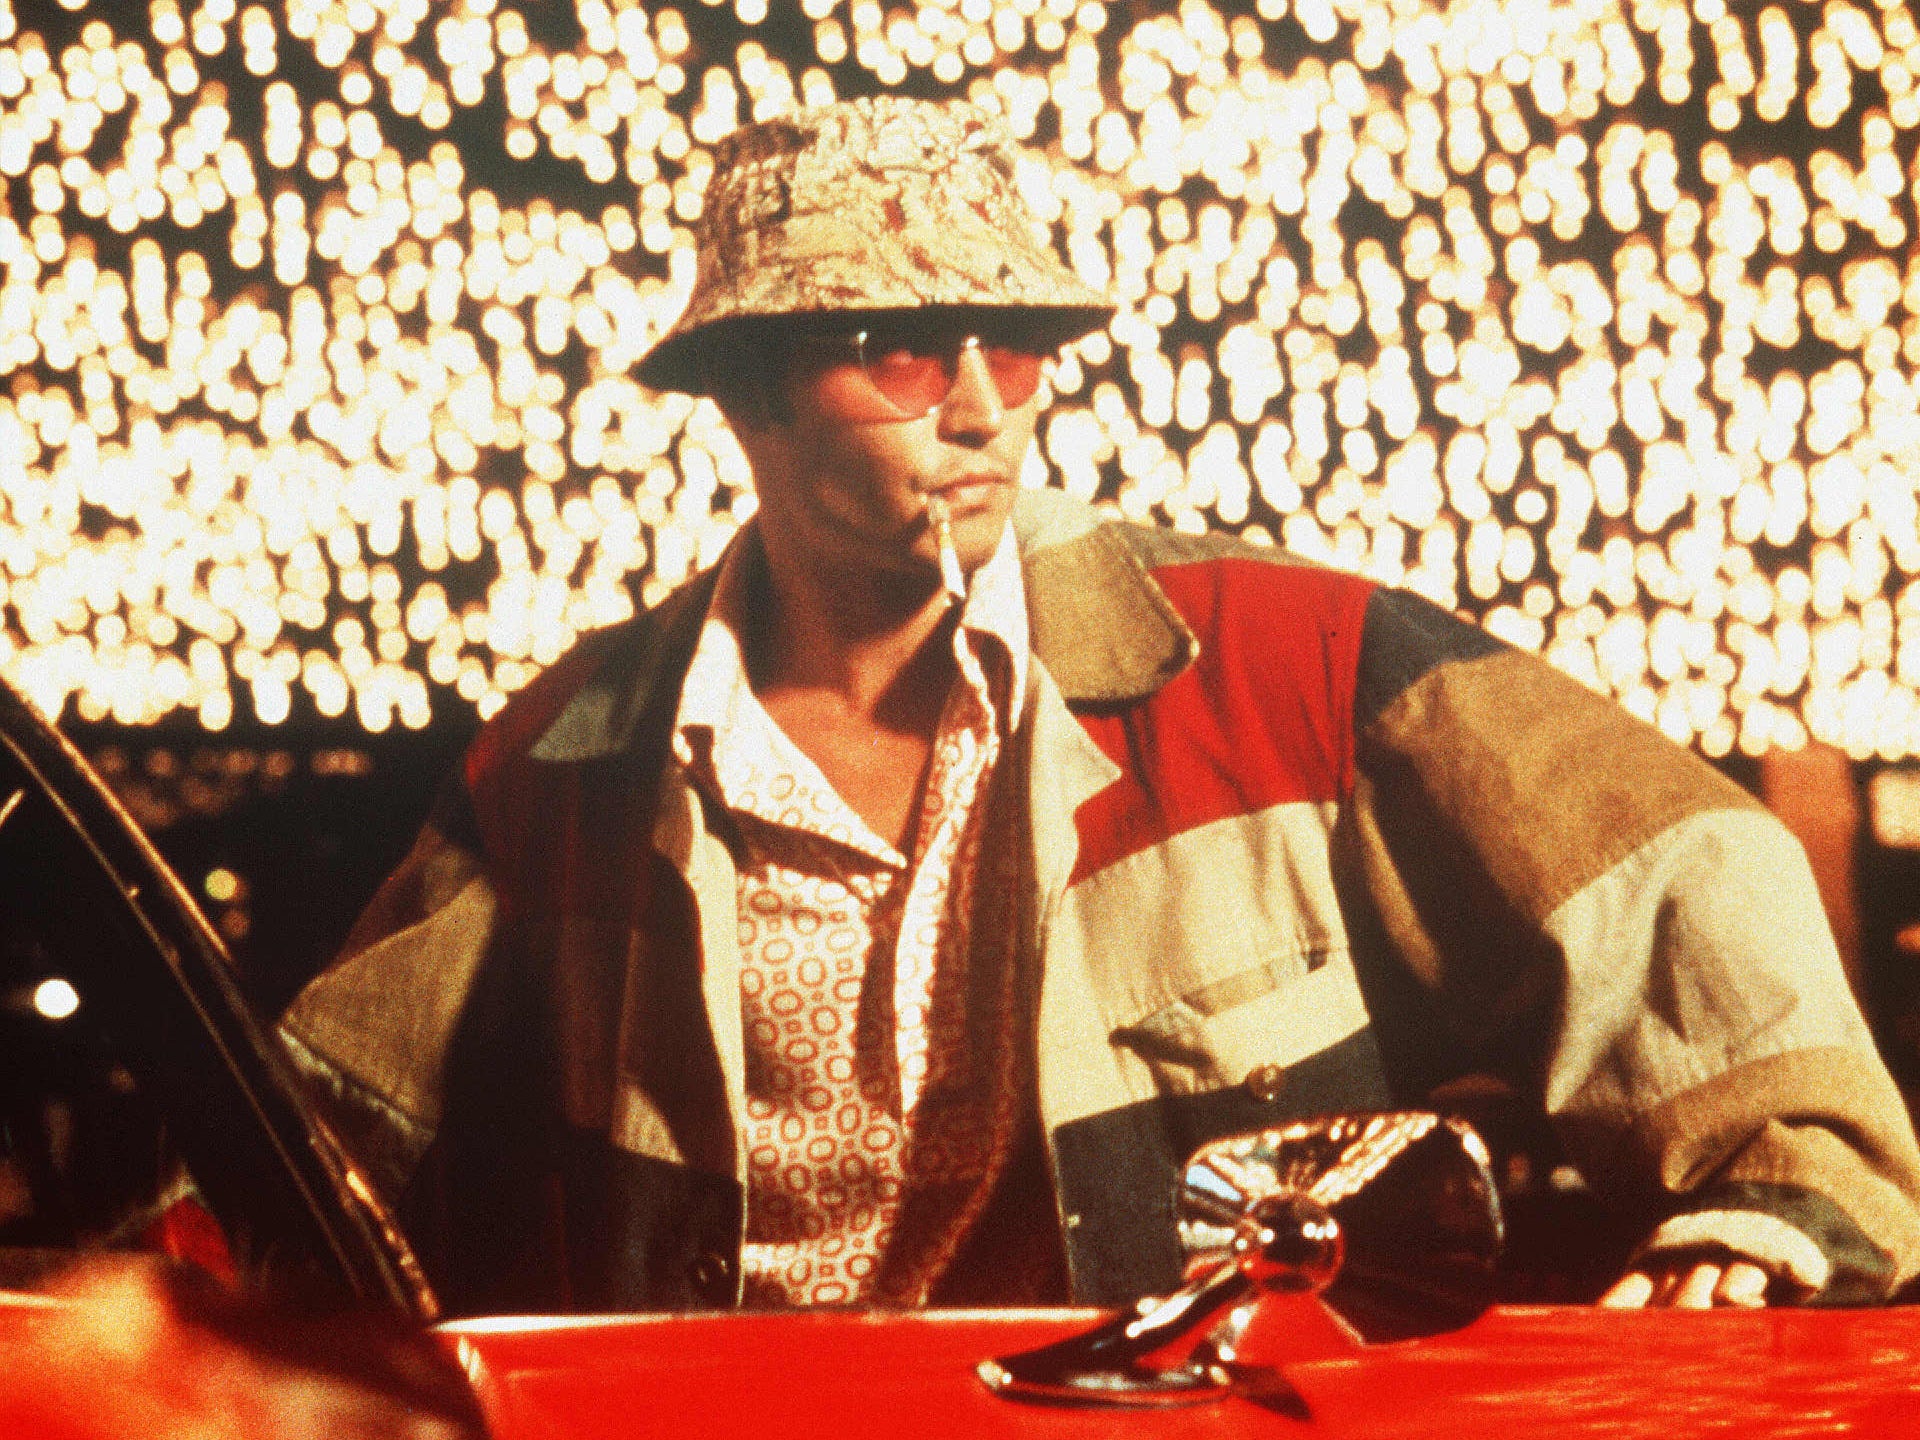 Johnny Depp played a character based on Thompson in the 1998 black comedy ‘Fear and Loathing in Las Vegas’